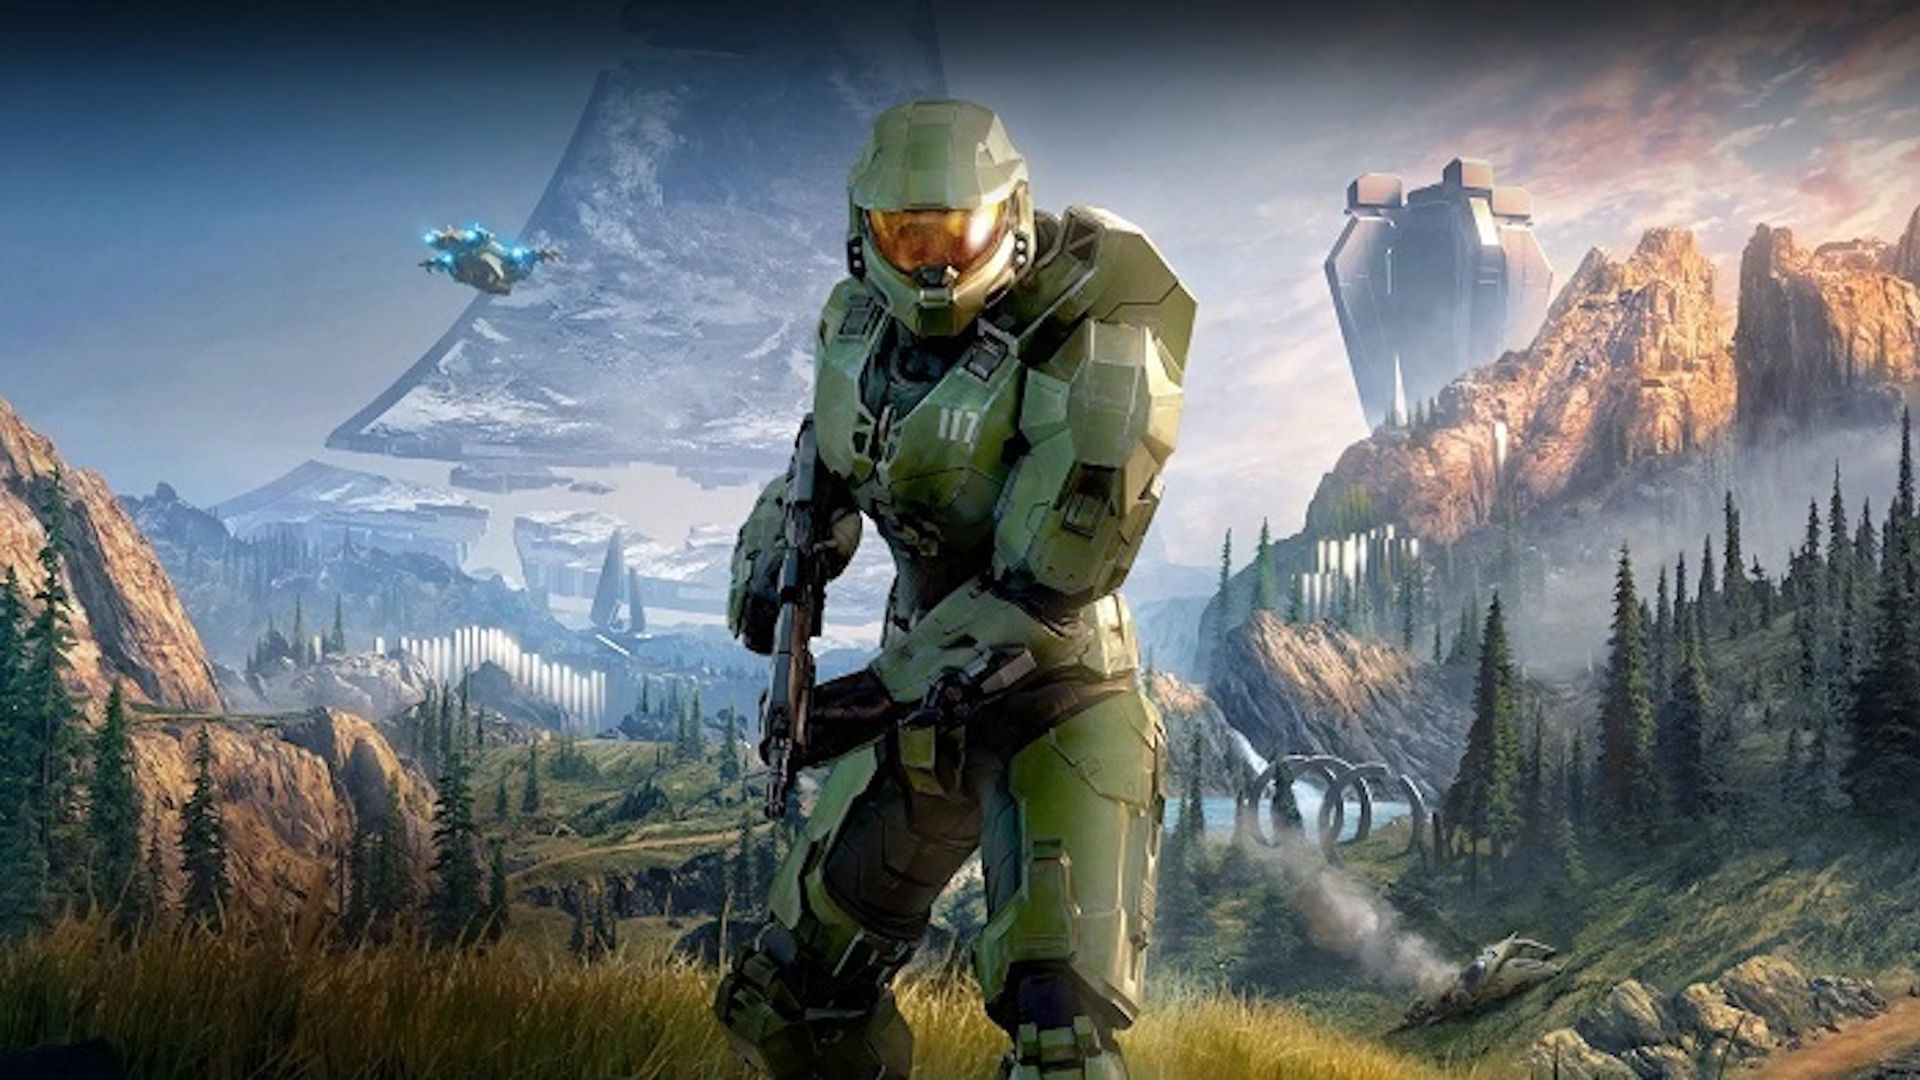 Image of a Halo video game soldier standing in a field